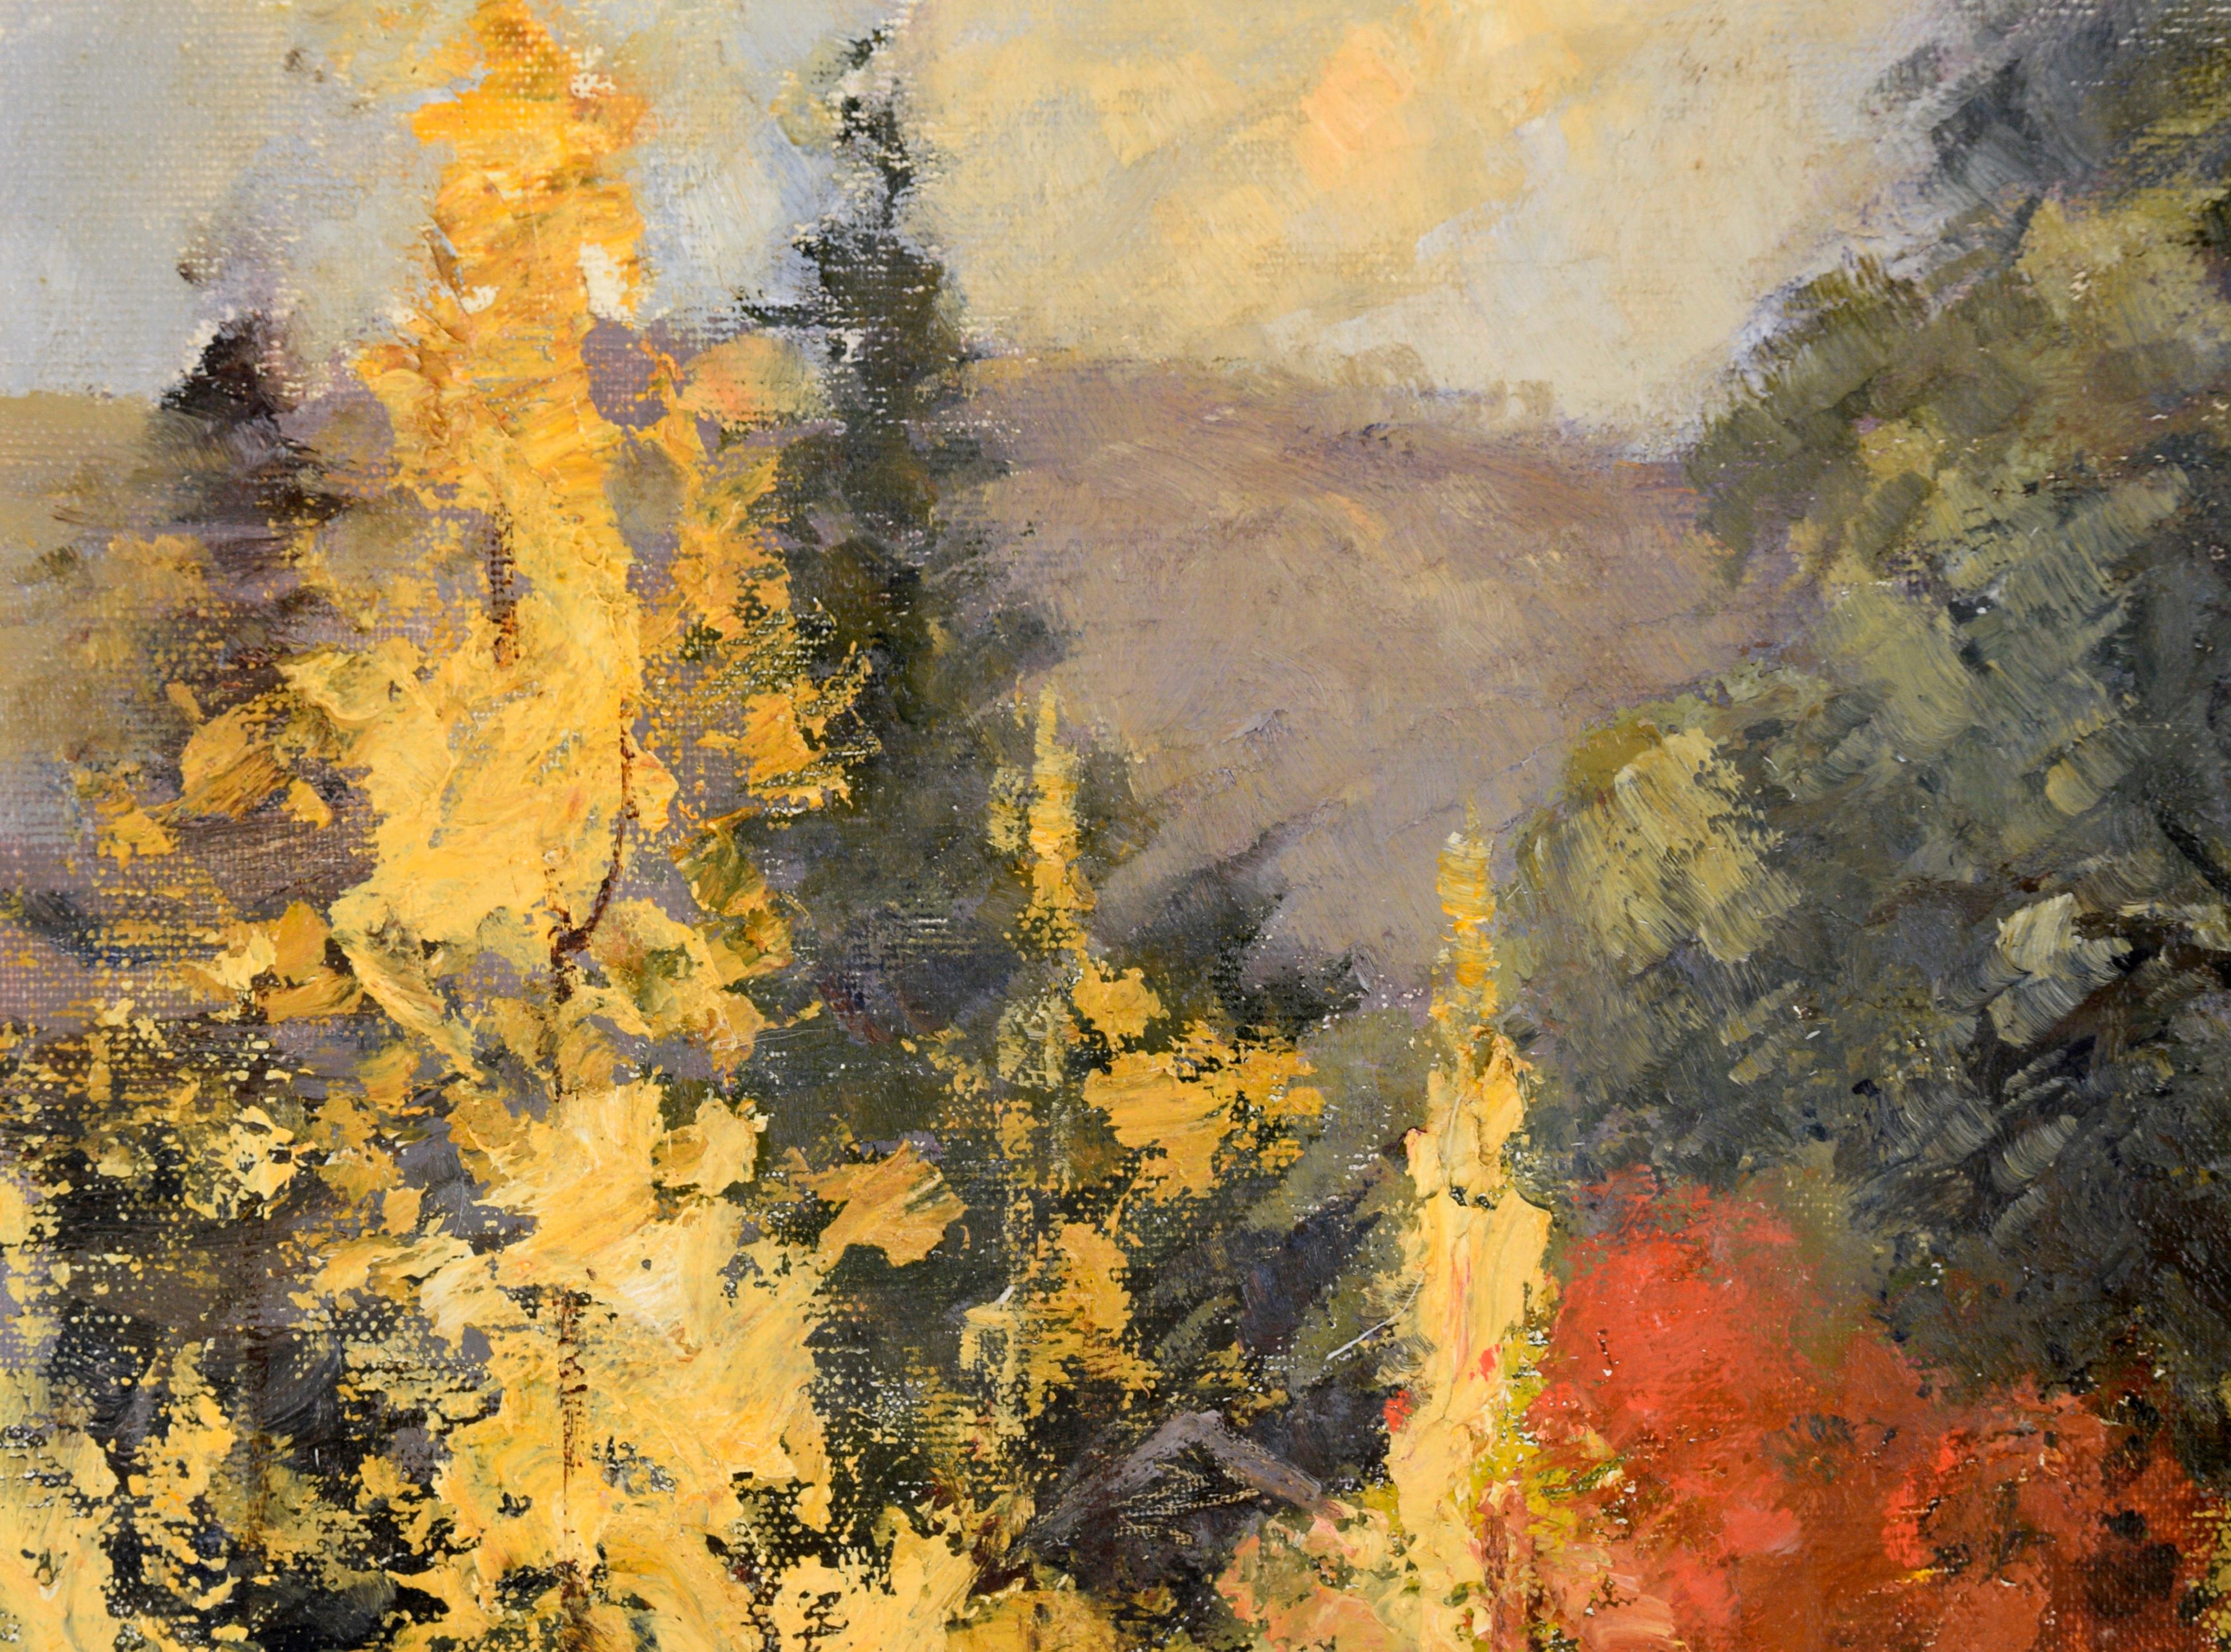 Autumn at the Cottage in the Woods - Landscape in oil on Masonite - Painting by Evelyn Campbell